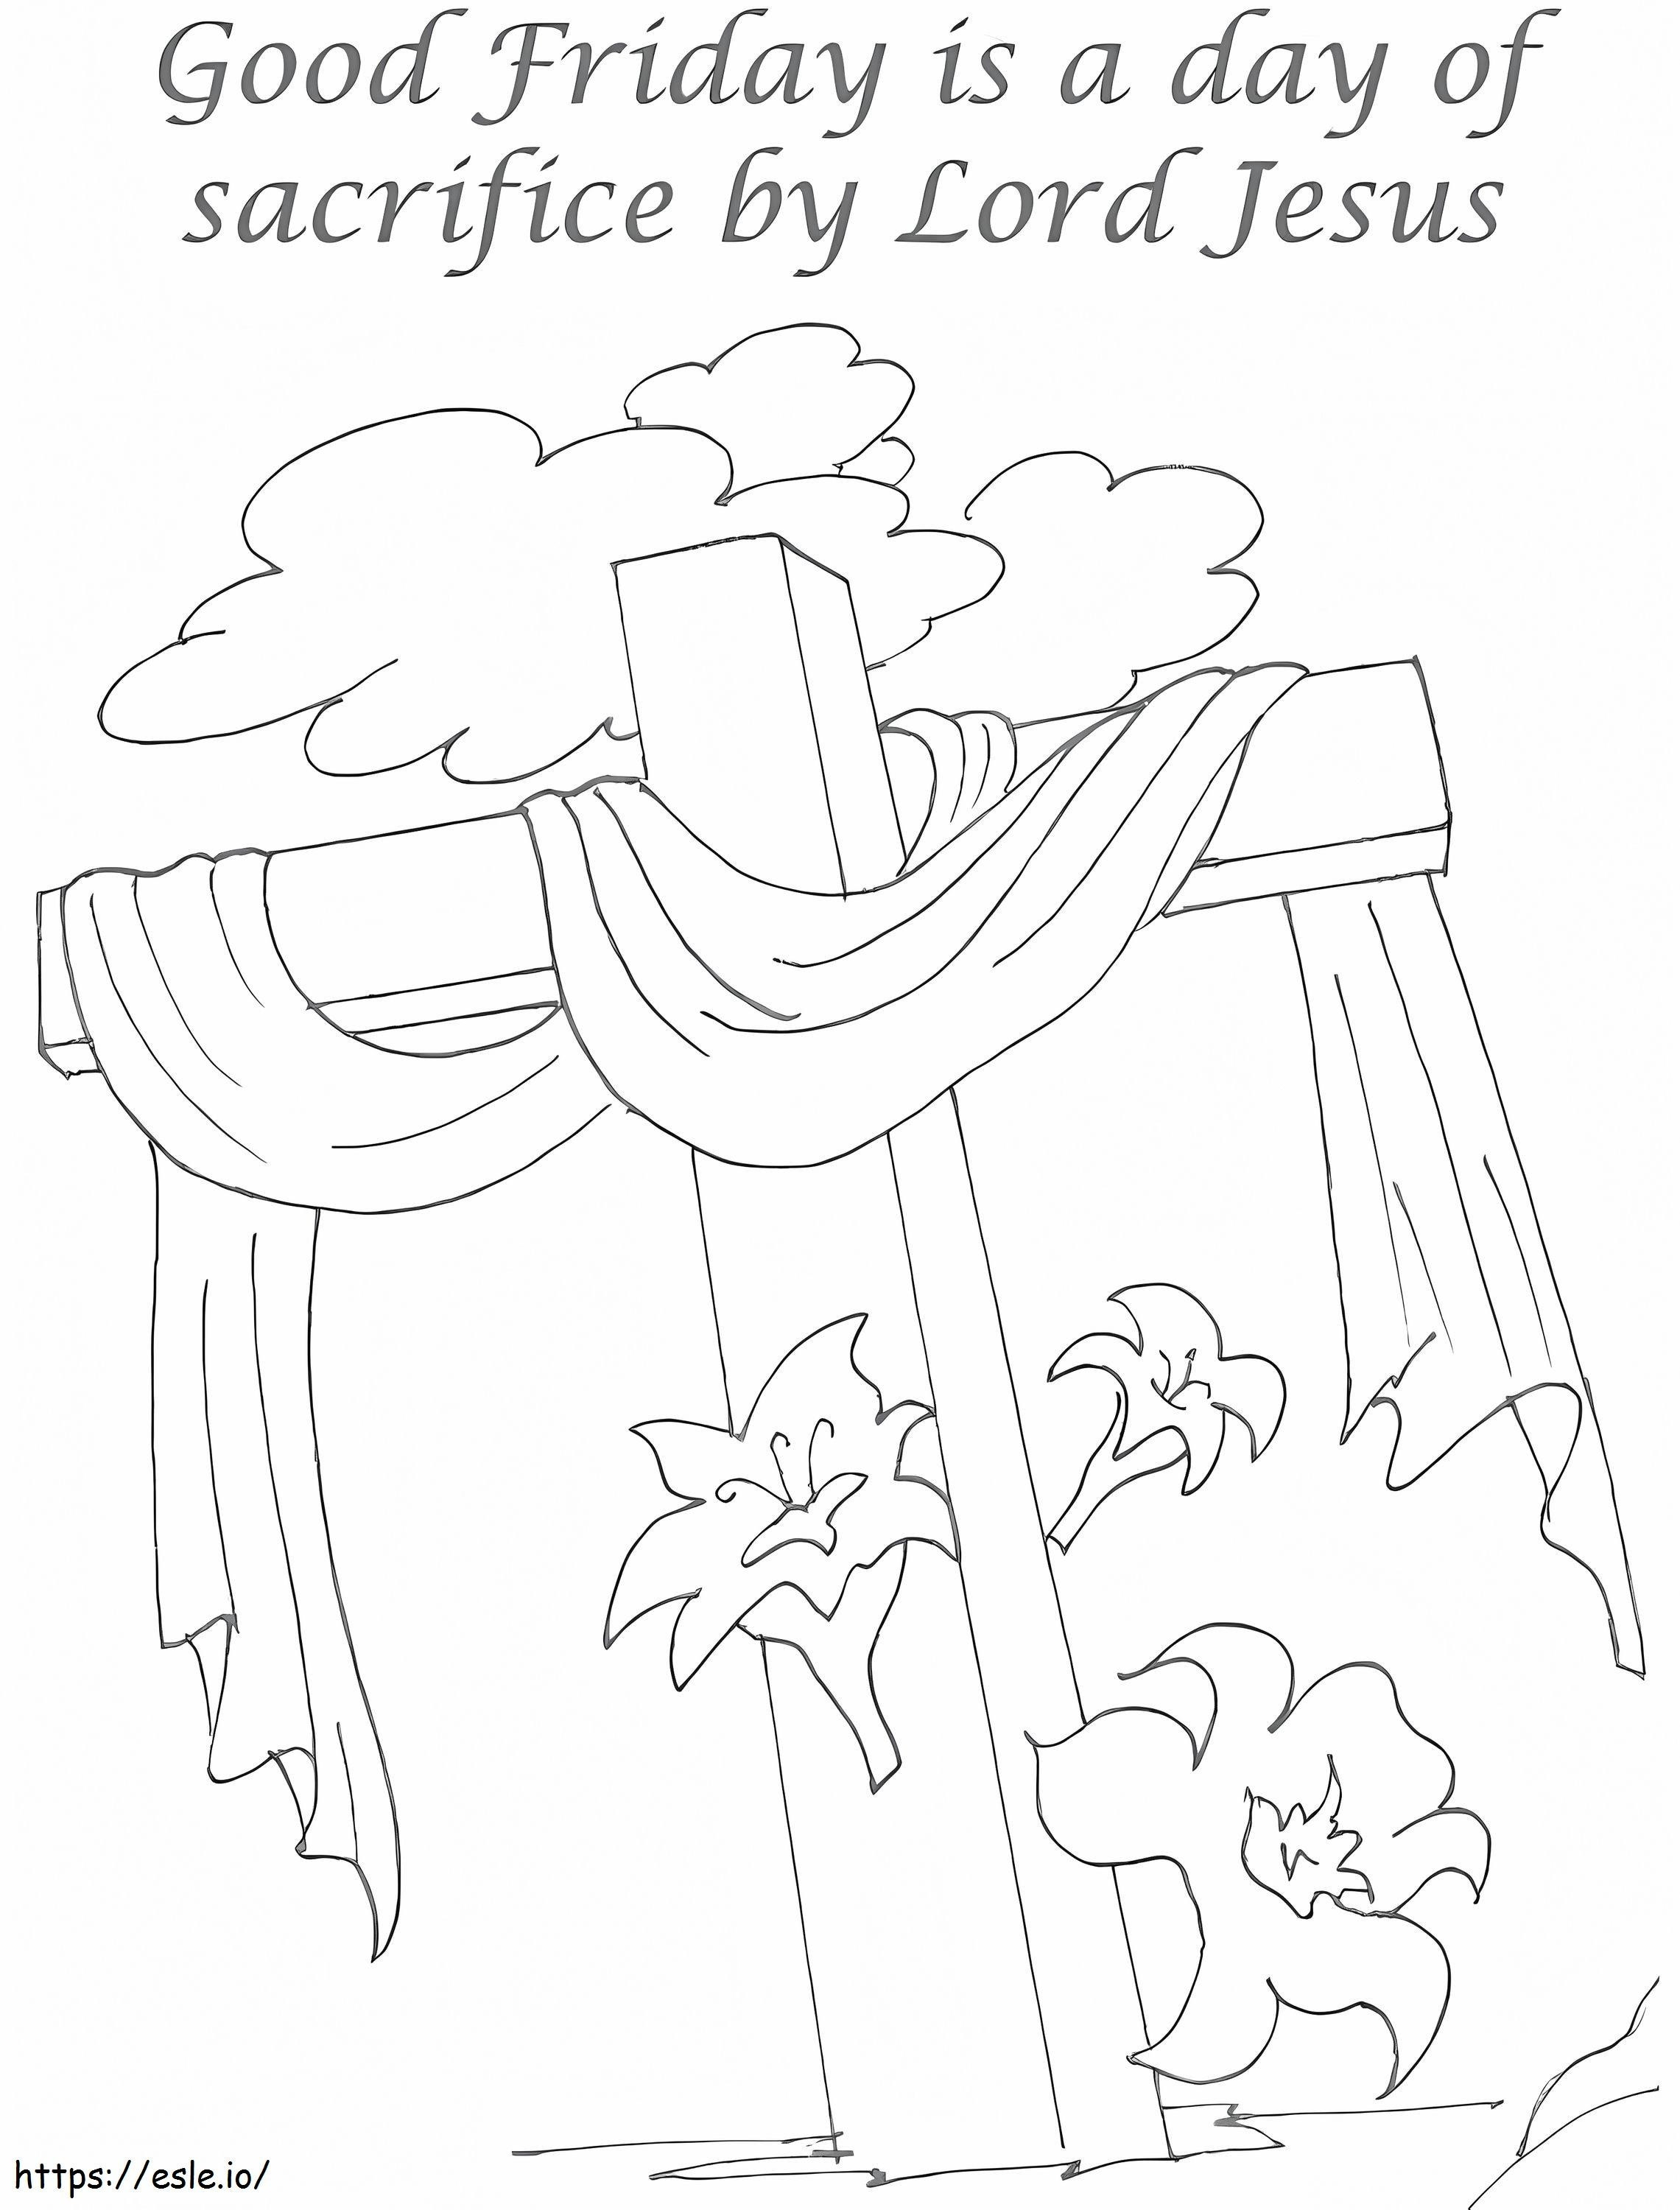 Good Friday 2 coloring page